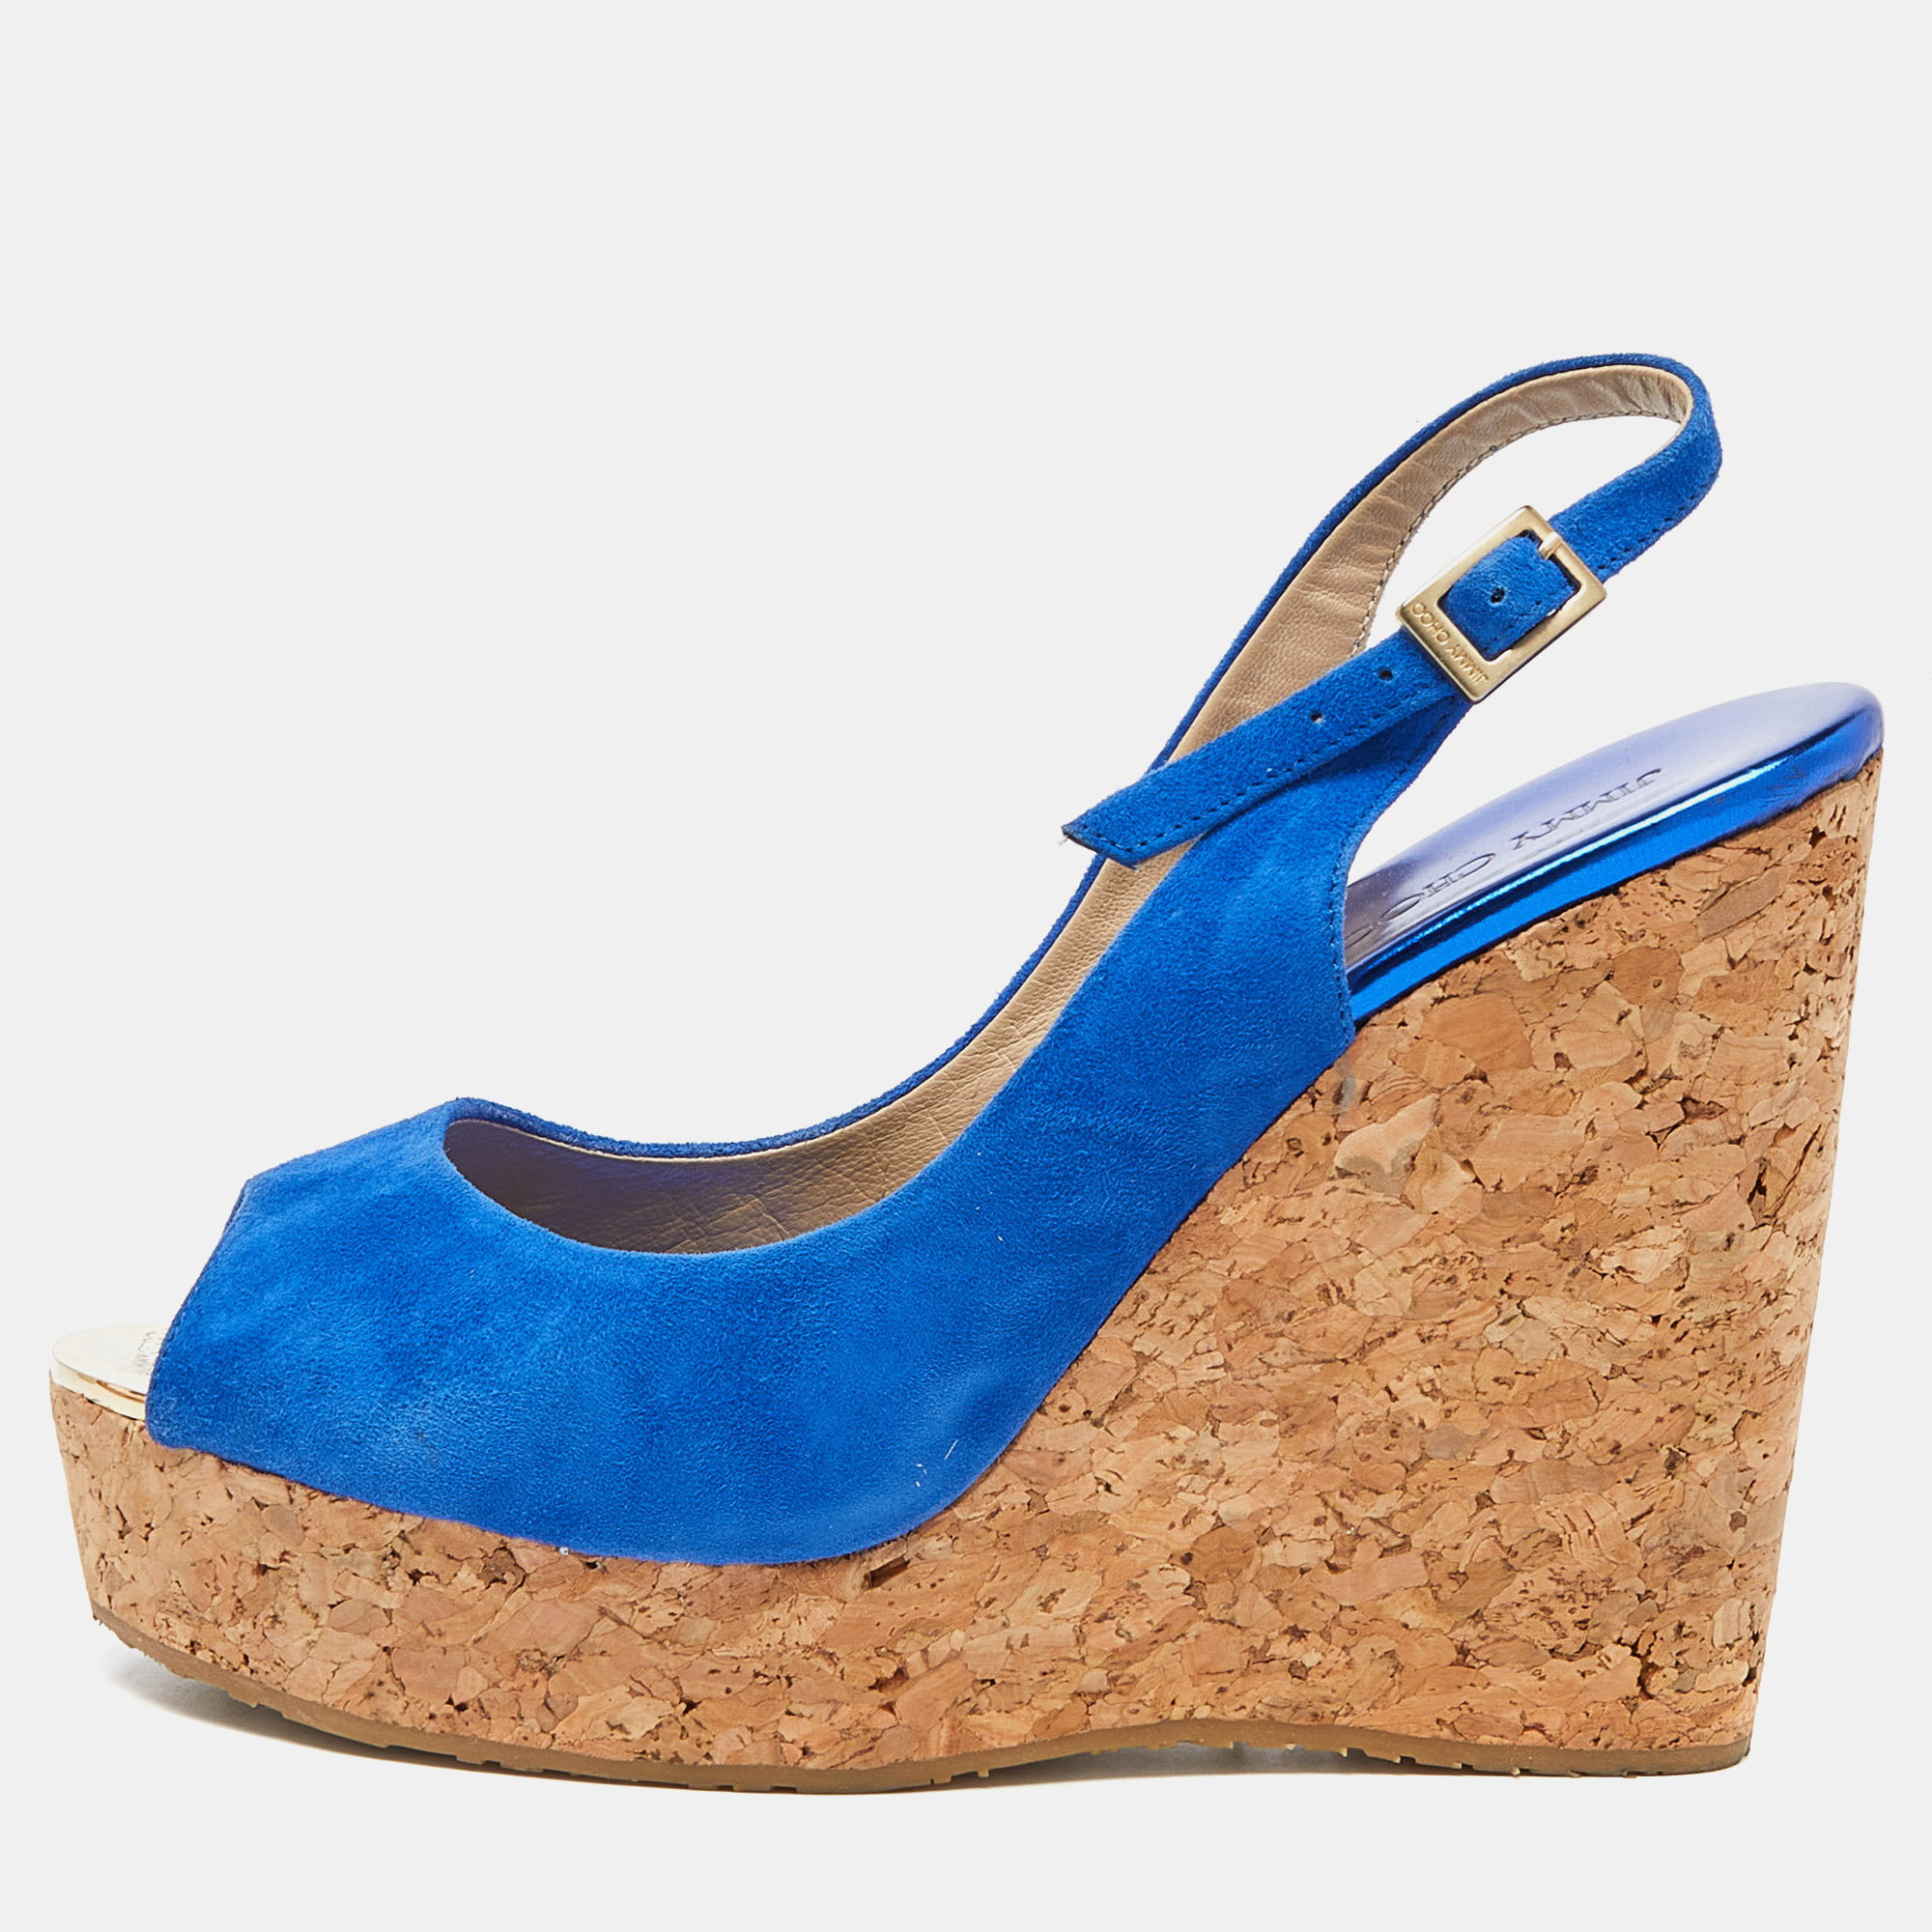 Jimmy choo blue suede cork wedge ankle strap sandals size 40